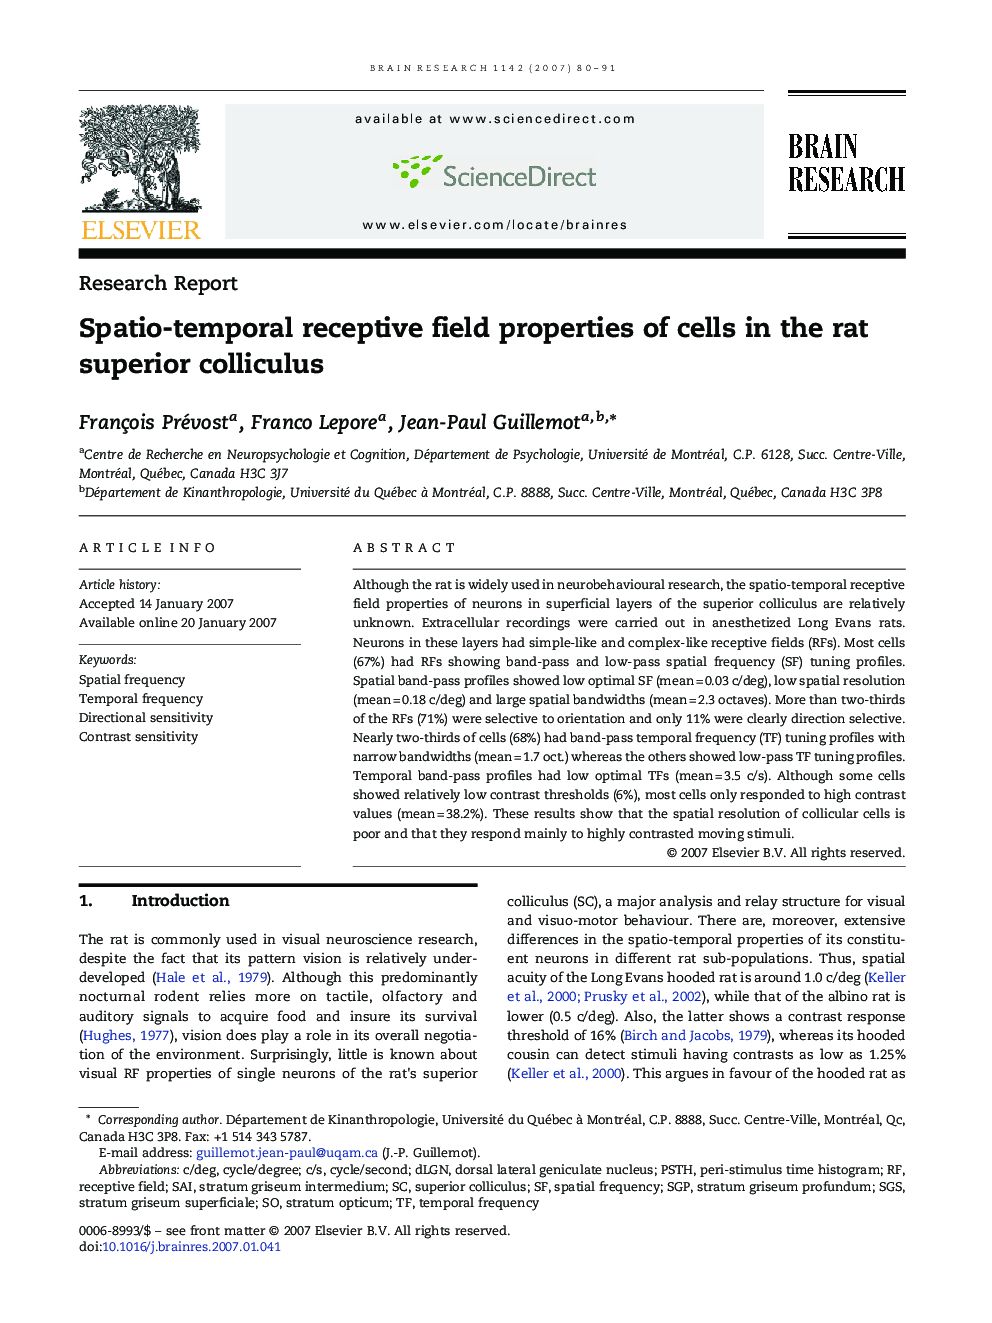 Spatio-temporal receptive field properties of cells in the rat superior colliculus